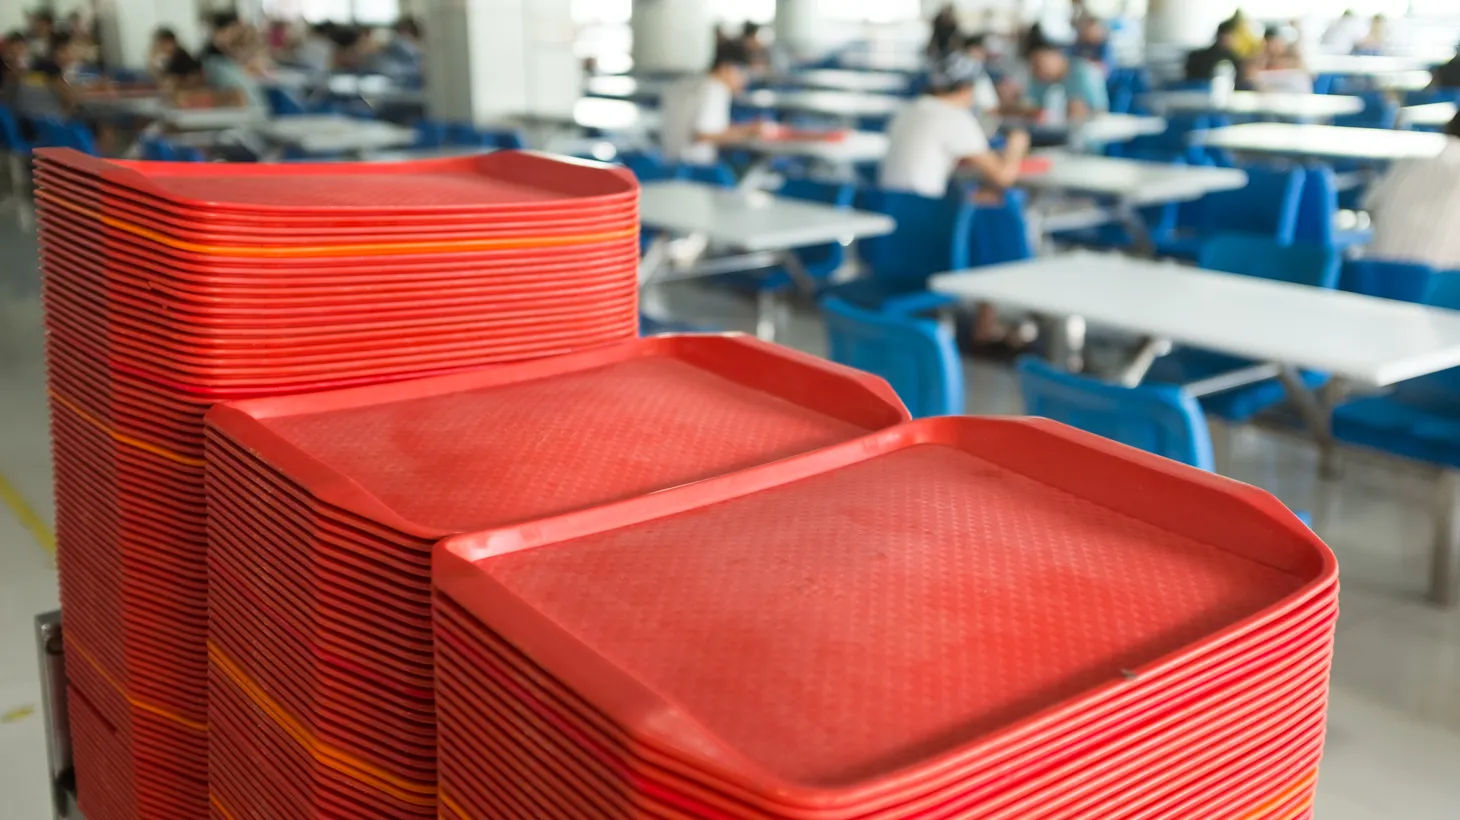 The school cafeteria has become the new battleground for federal assistance programs.